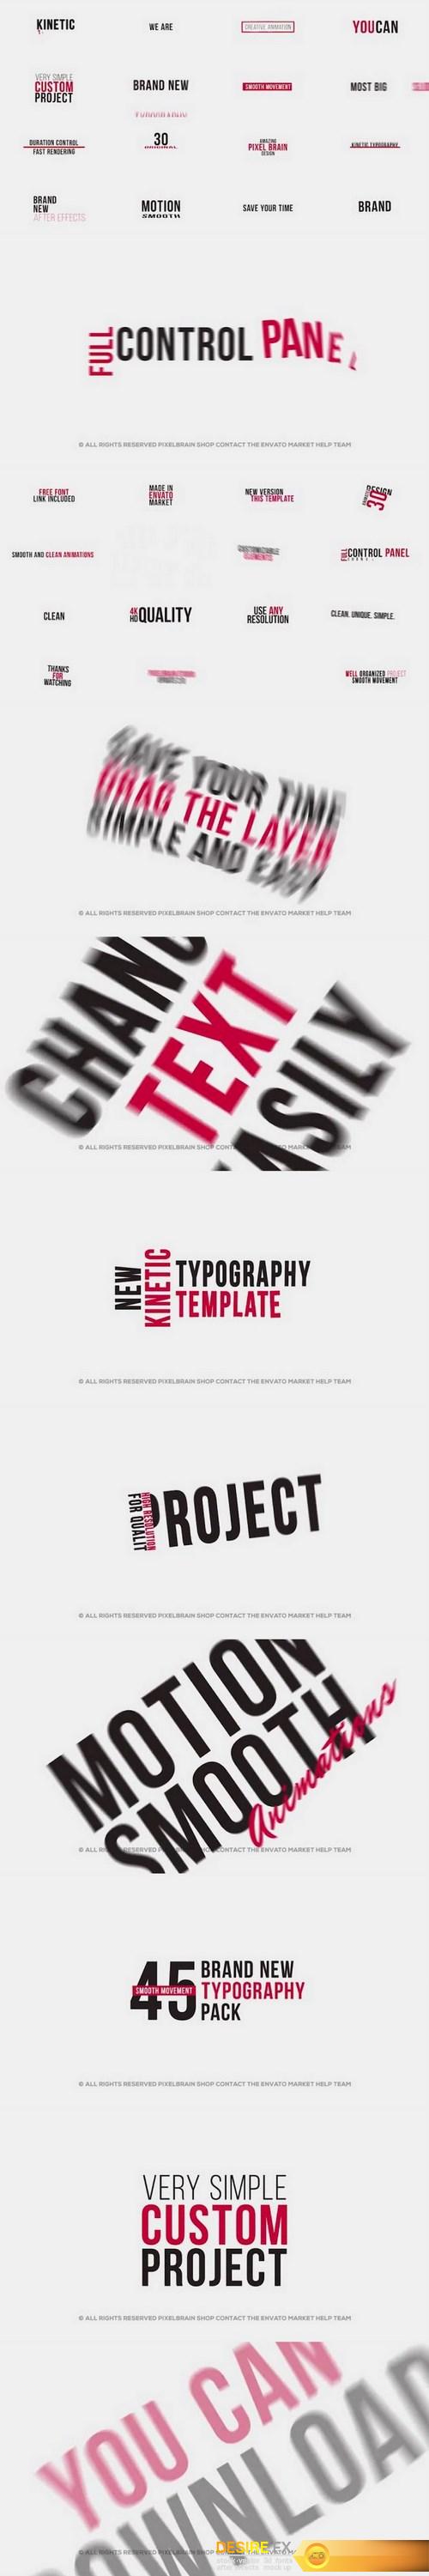 Videohive - Kinetic Typography - 20880695